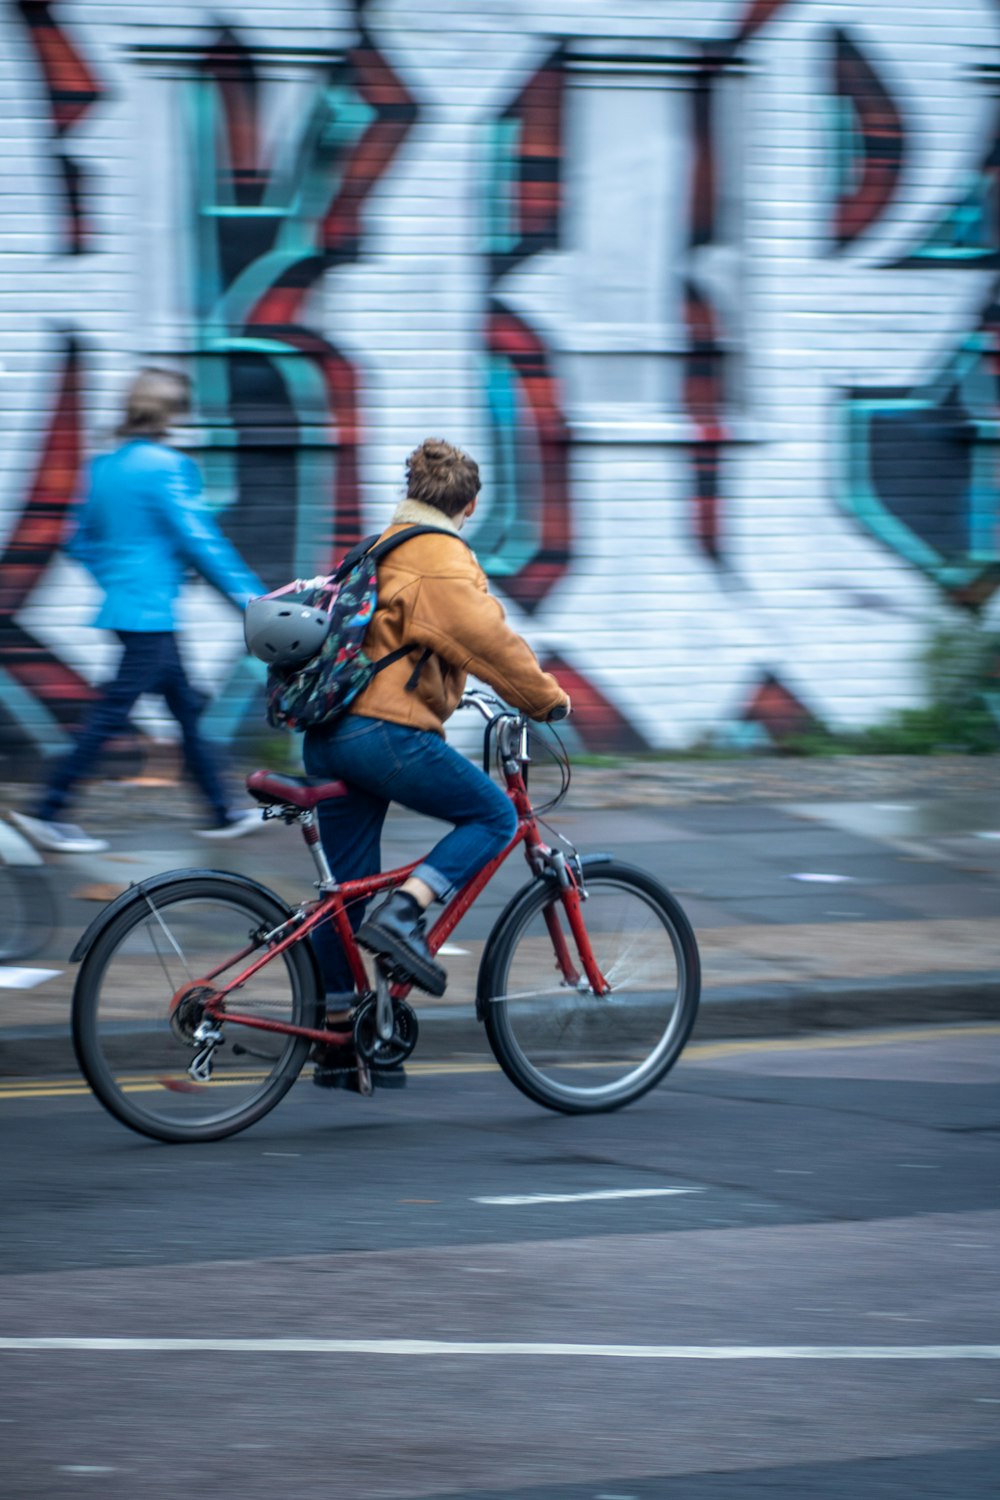 panning photography of person on bike